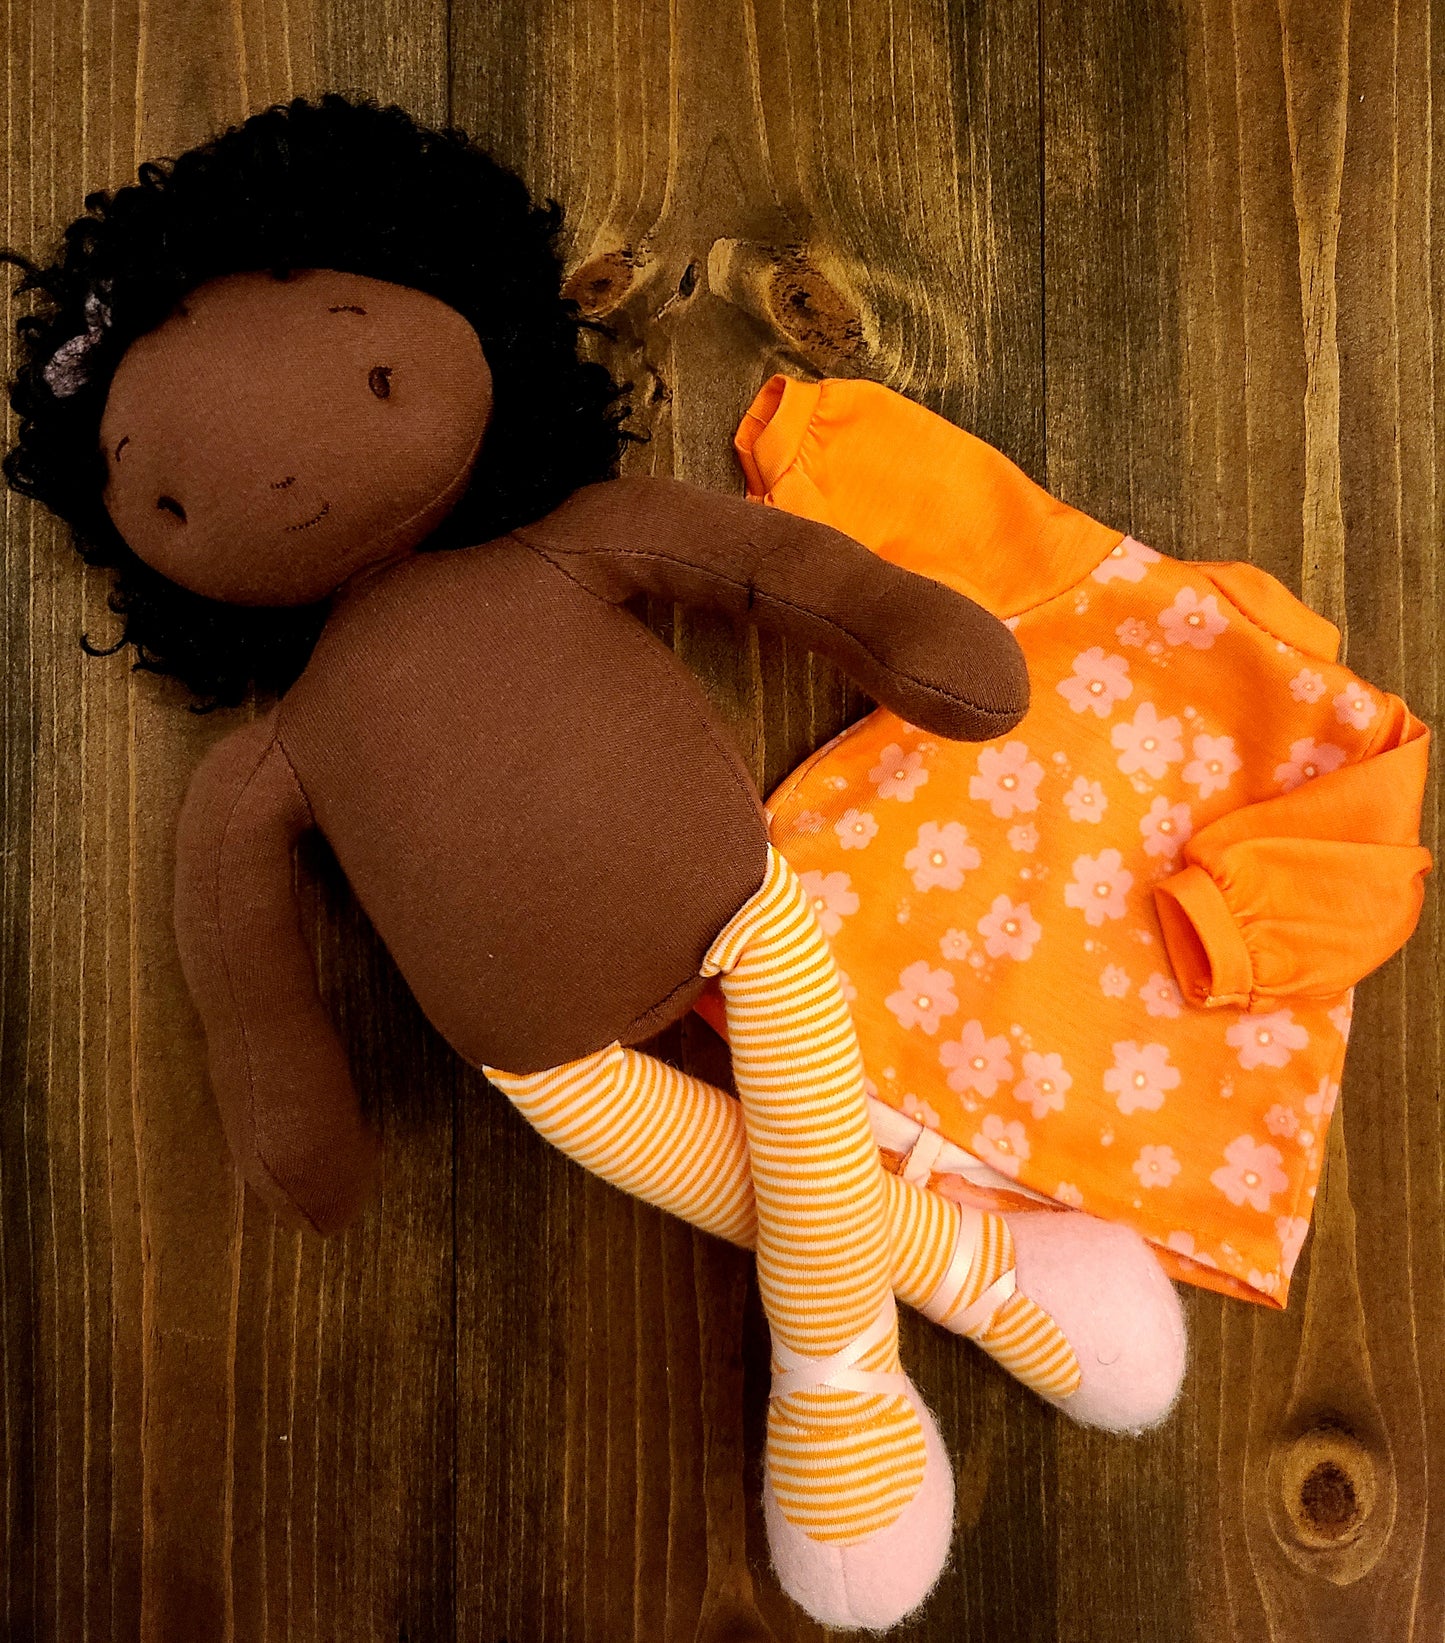 Soft Rag 12in Orange Floral  Dress Brown Girl Plush Doll Toy/Handmade Baby Gift Toy/ Global Sister